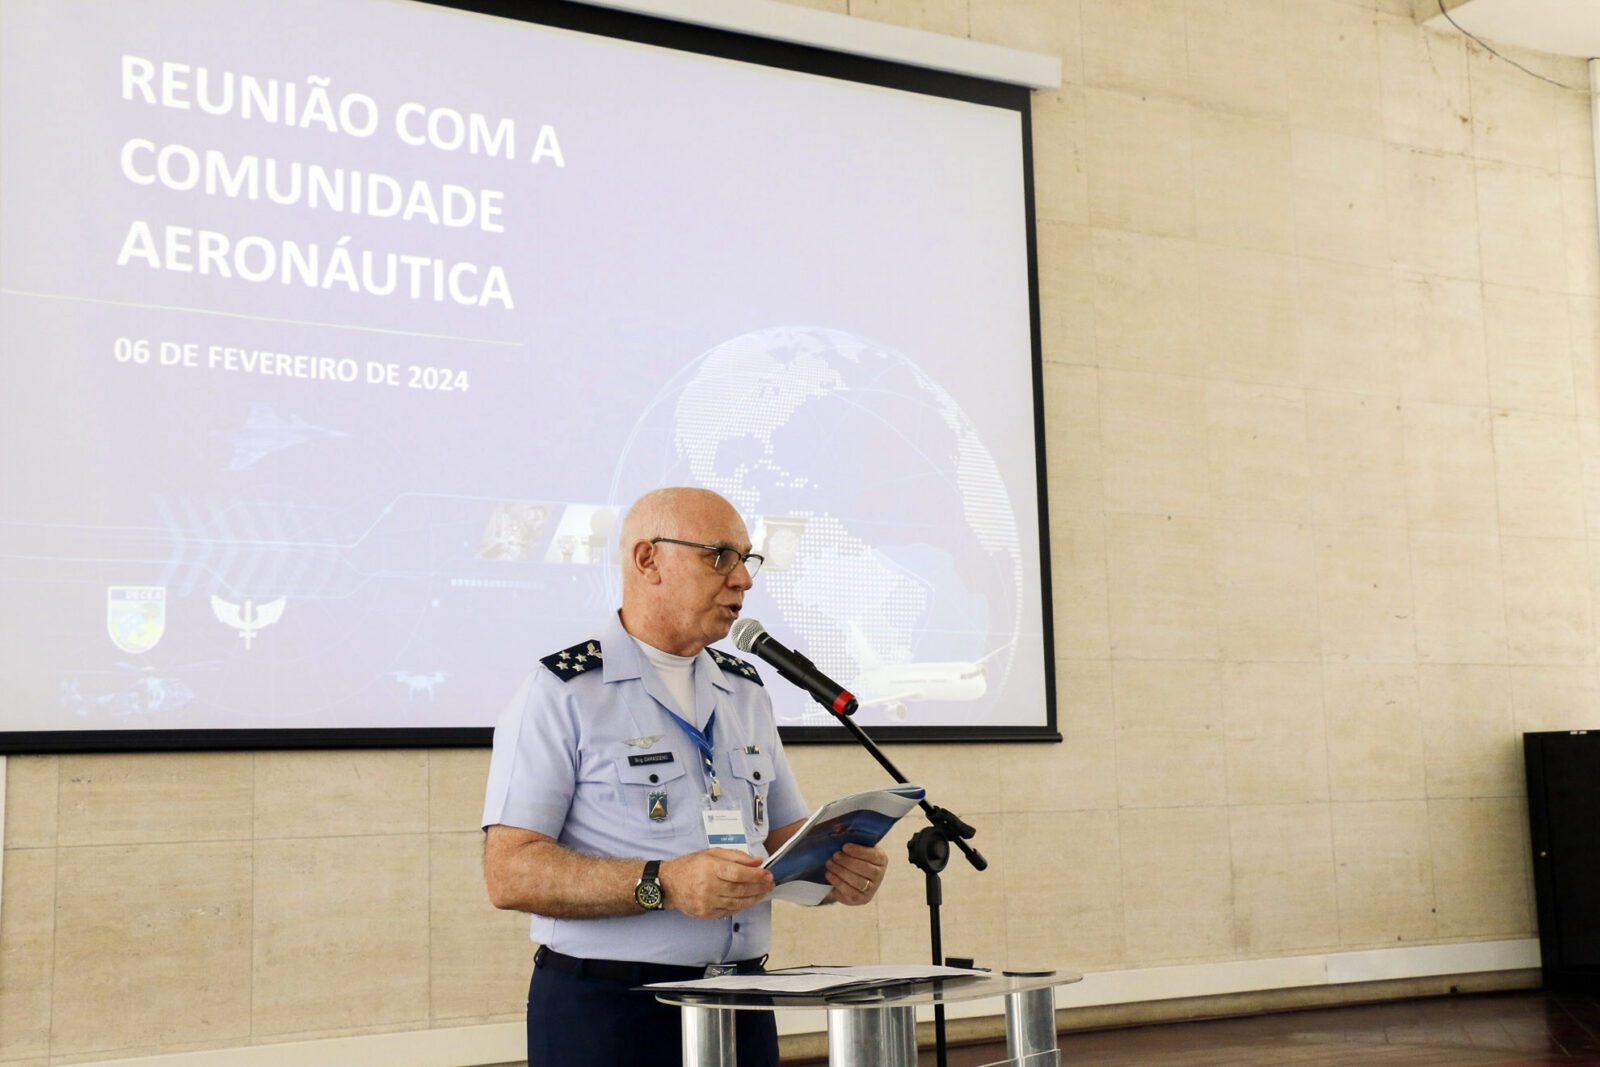 DECEA promotes institutional meeting with the aviation community in Rio de Janeiro